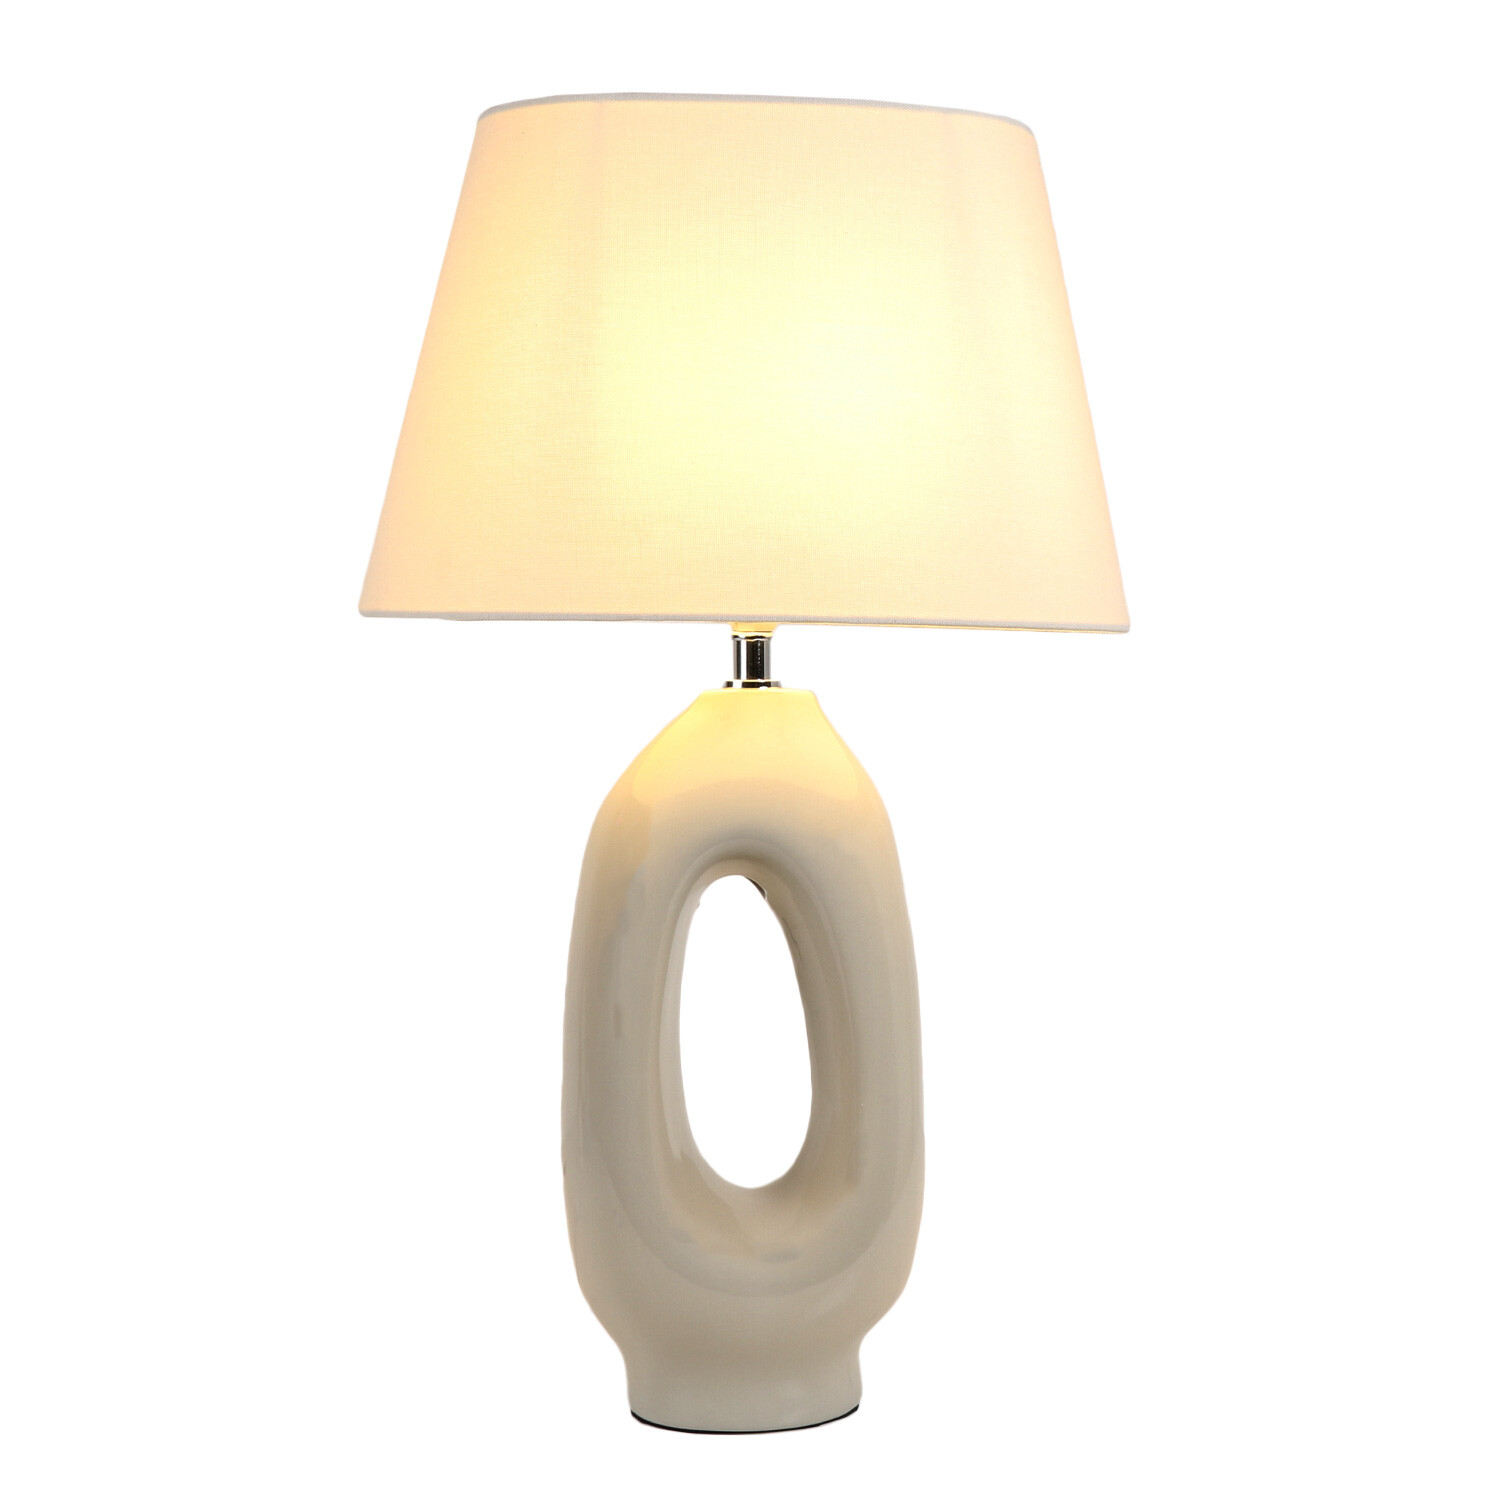 Single Harriet Oval Table Lamp in Assorted styles Image 2